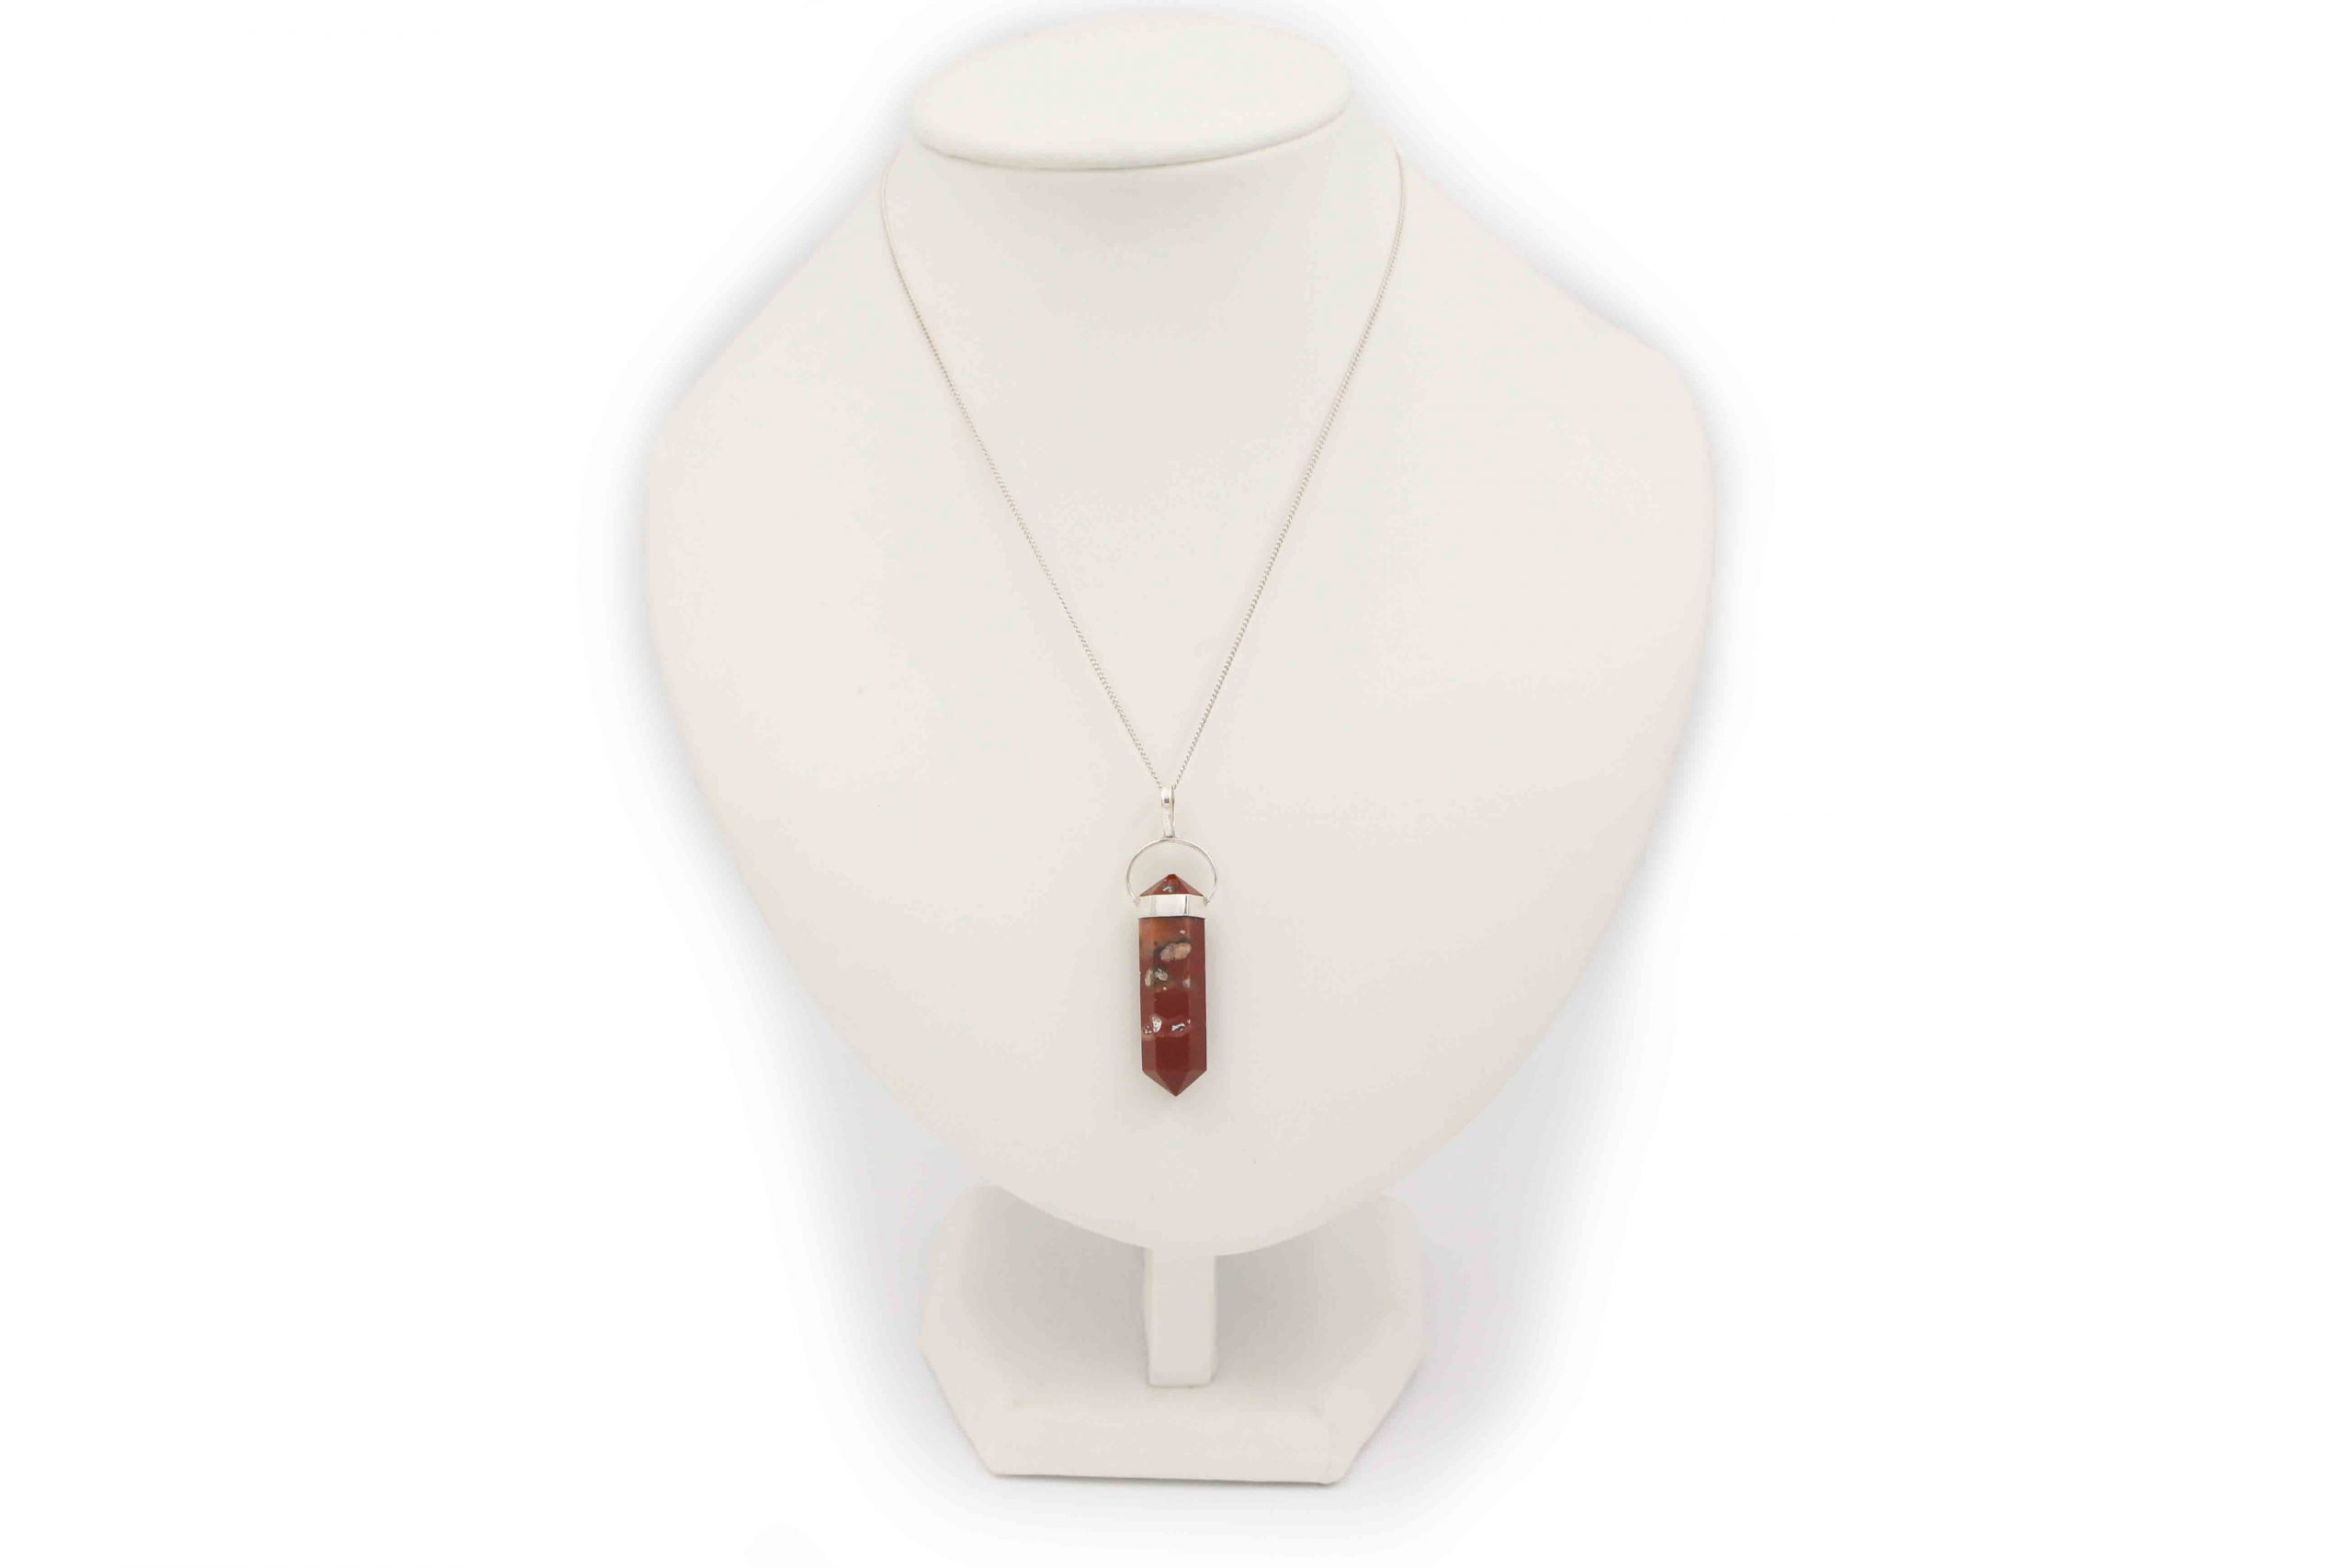 Red Jasper "Double Point" Pendant Sterling Silver - Crystal Dreams